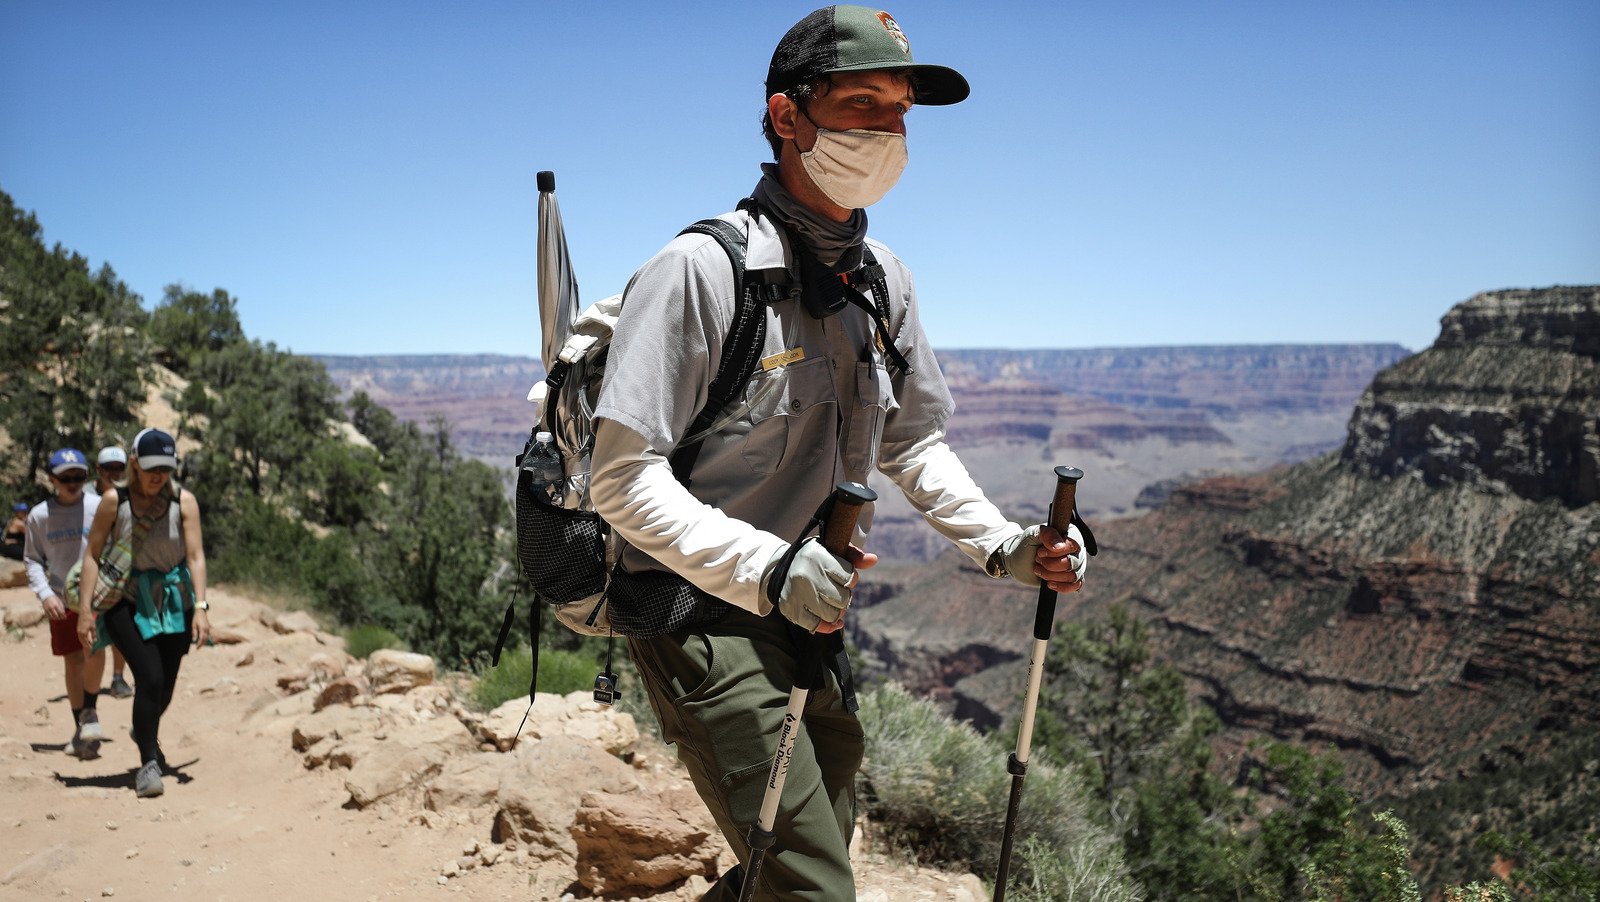 This Southwestern Hike Is Considered One Of The Most Dangerous In America